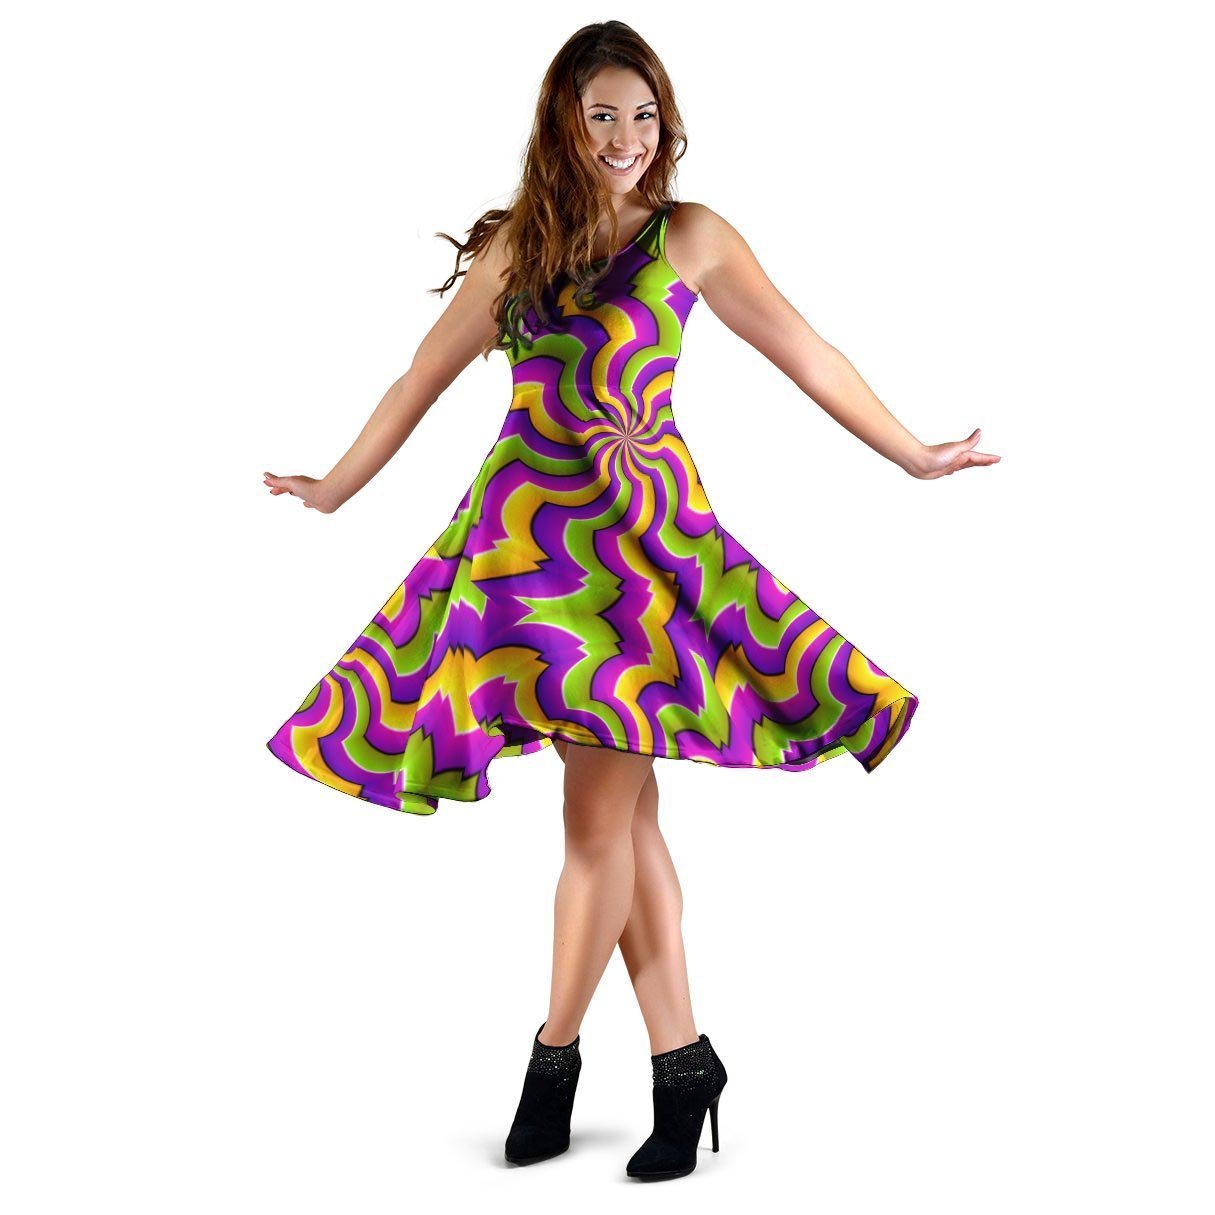 Zigzag Psychedelic Optical illusion Dress-grizzshop